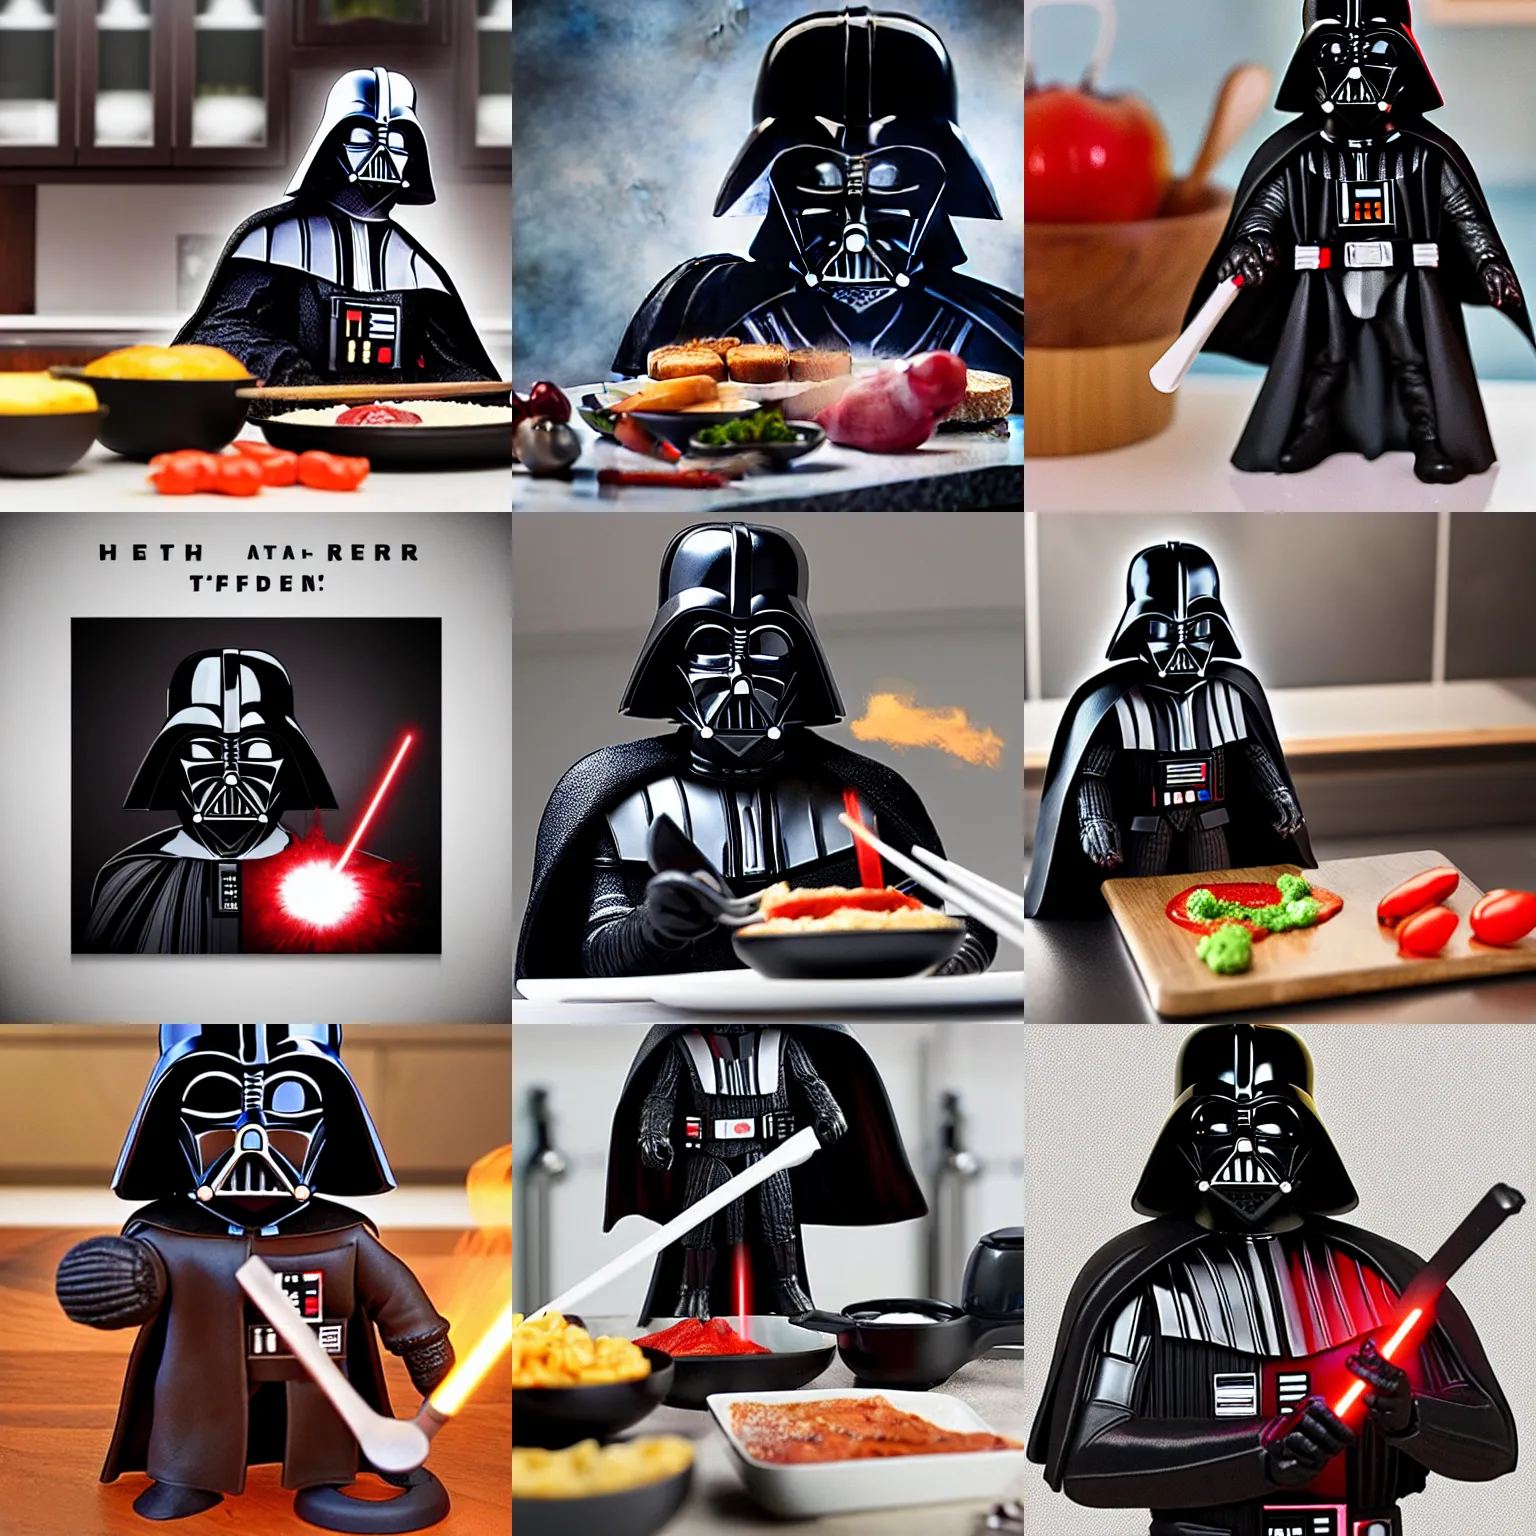 Darth Vader can be helpful in the kitchen • Offbeat Home & Life